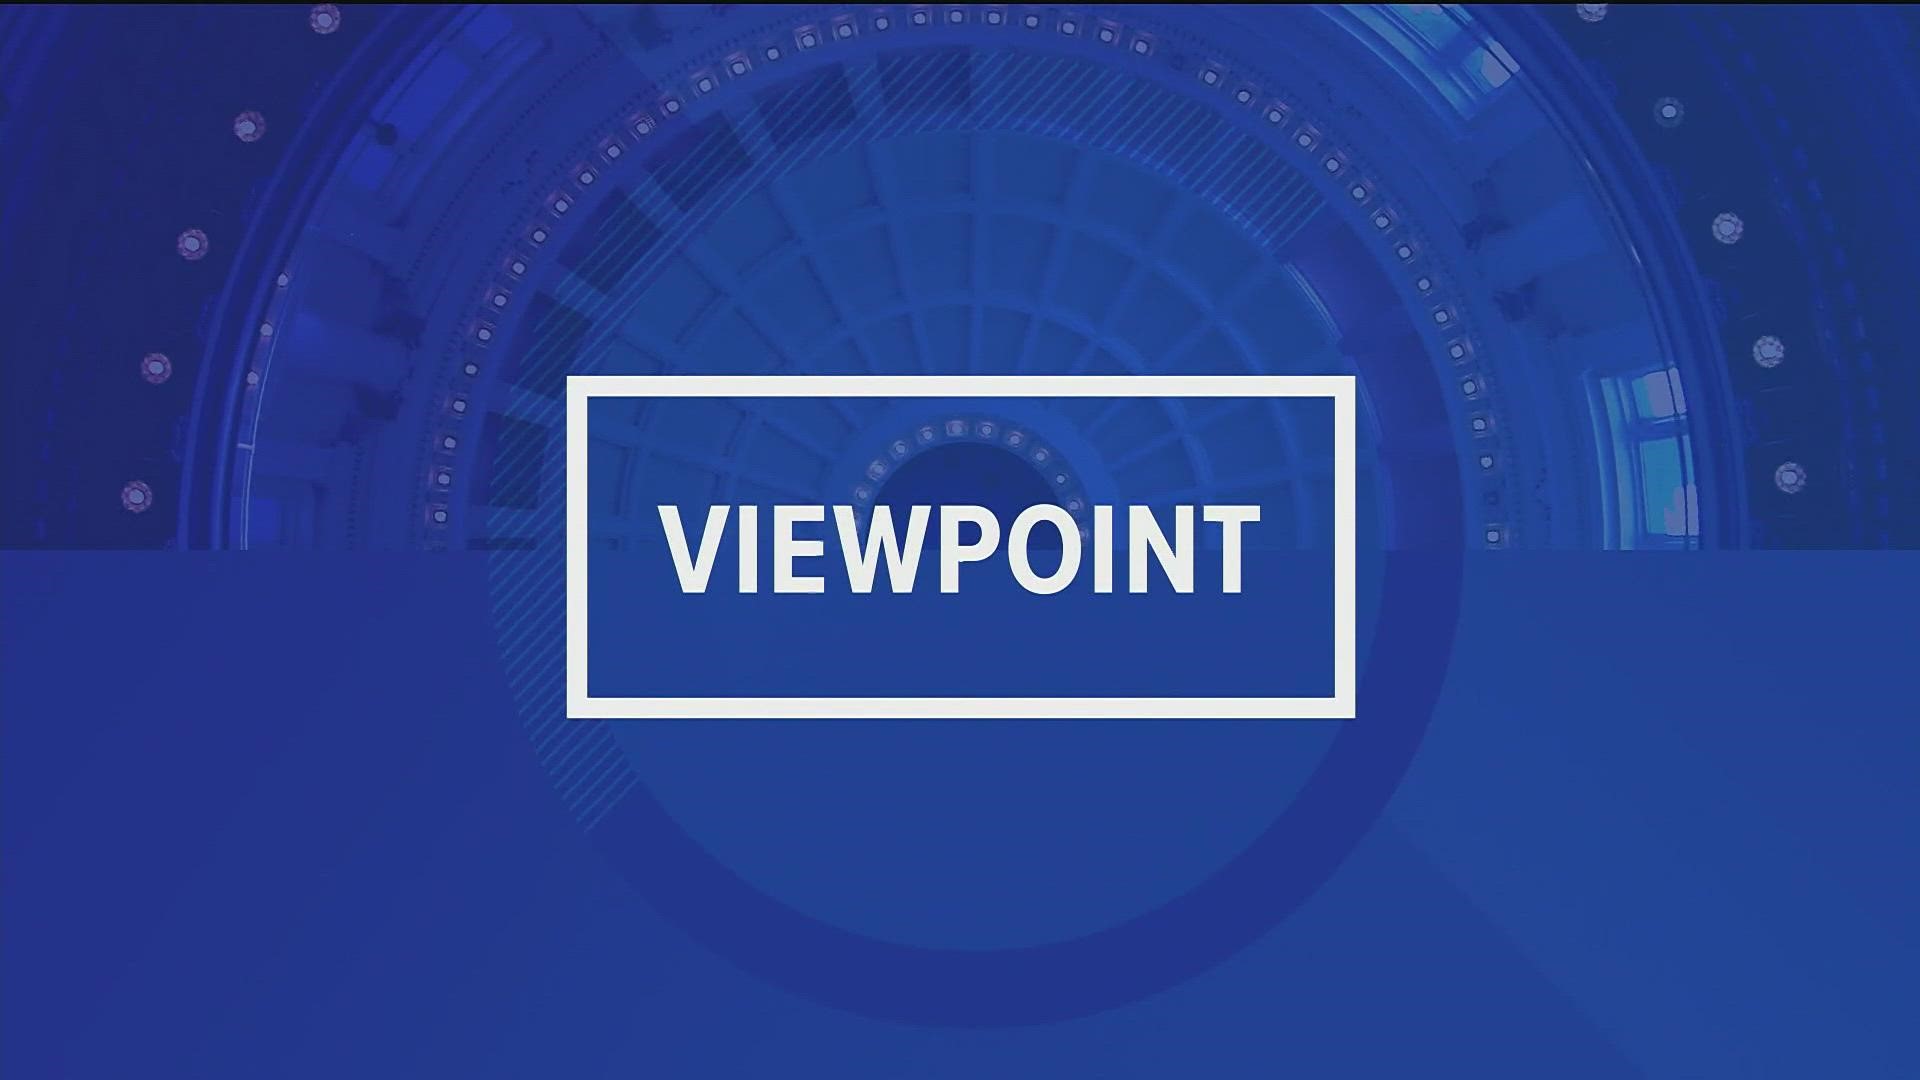 On this Viewpoint, Sen. Jim Risch (R-Idaho) and Democrat Paulette Jordan discuss racial injustice, police, foreign relations, public lands and the Second Amendment.